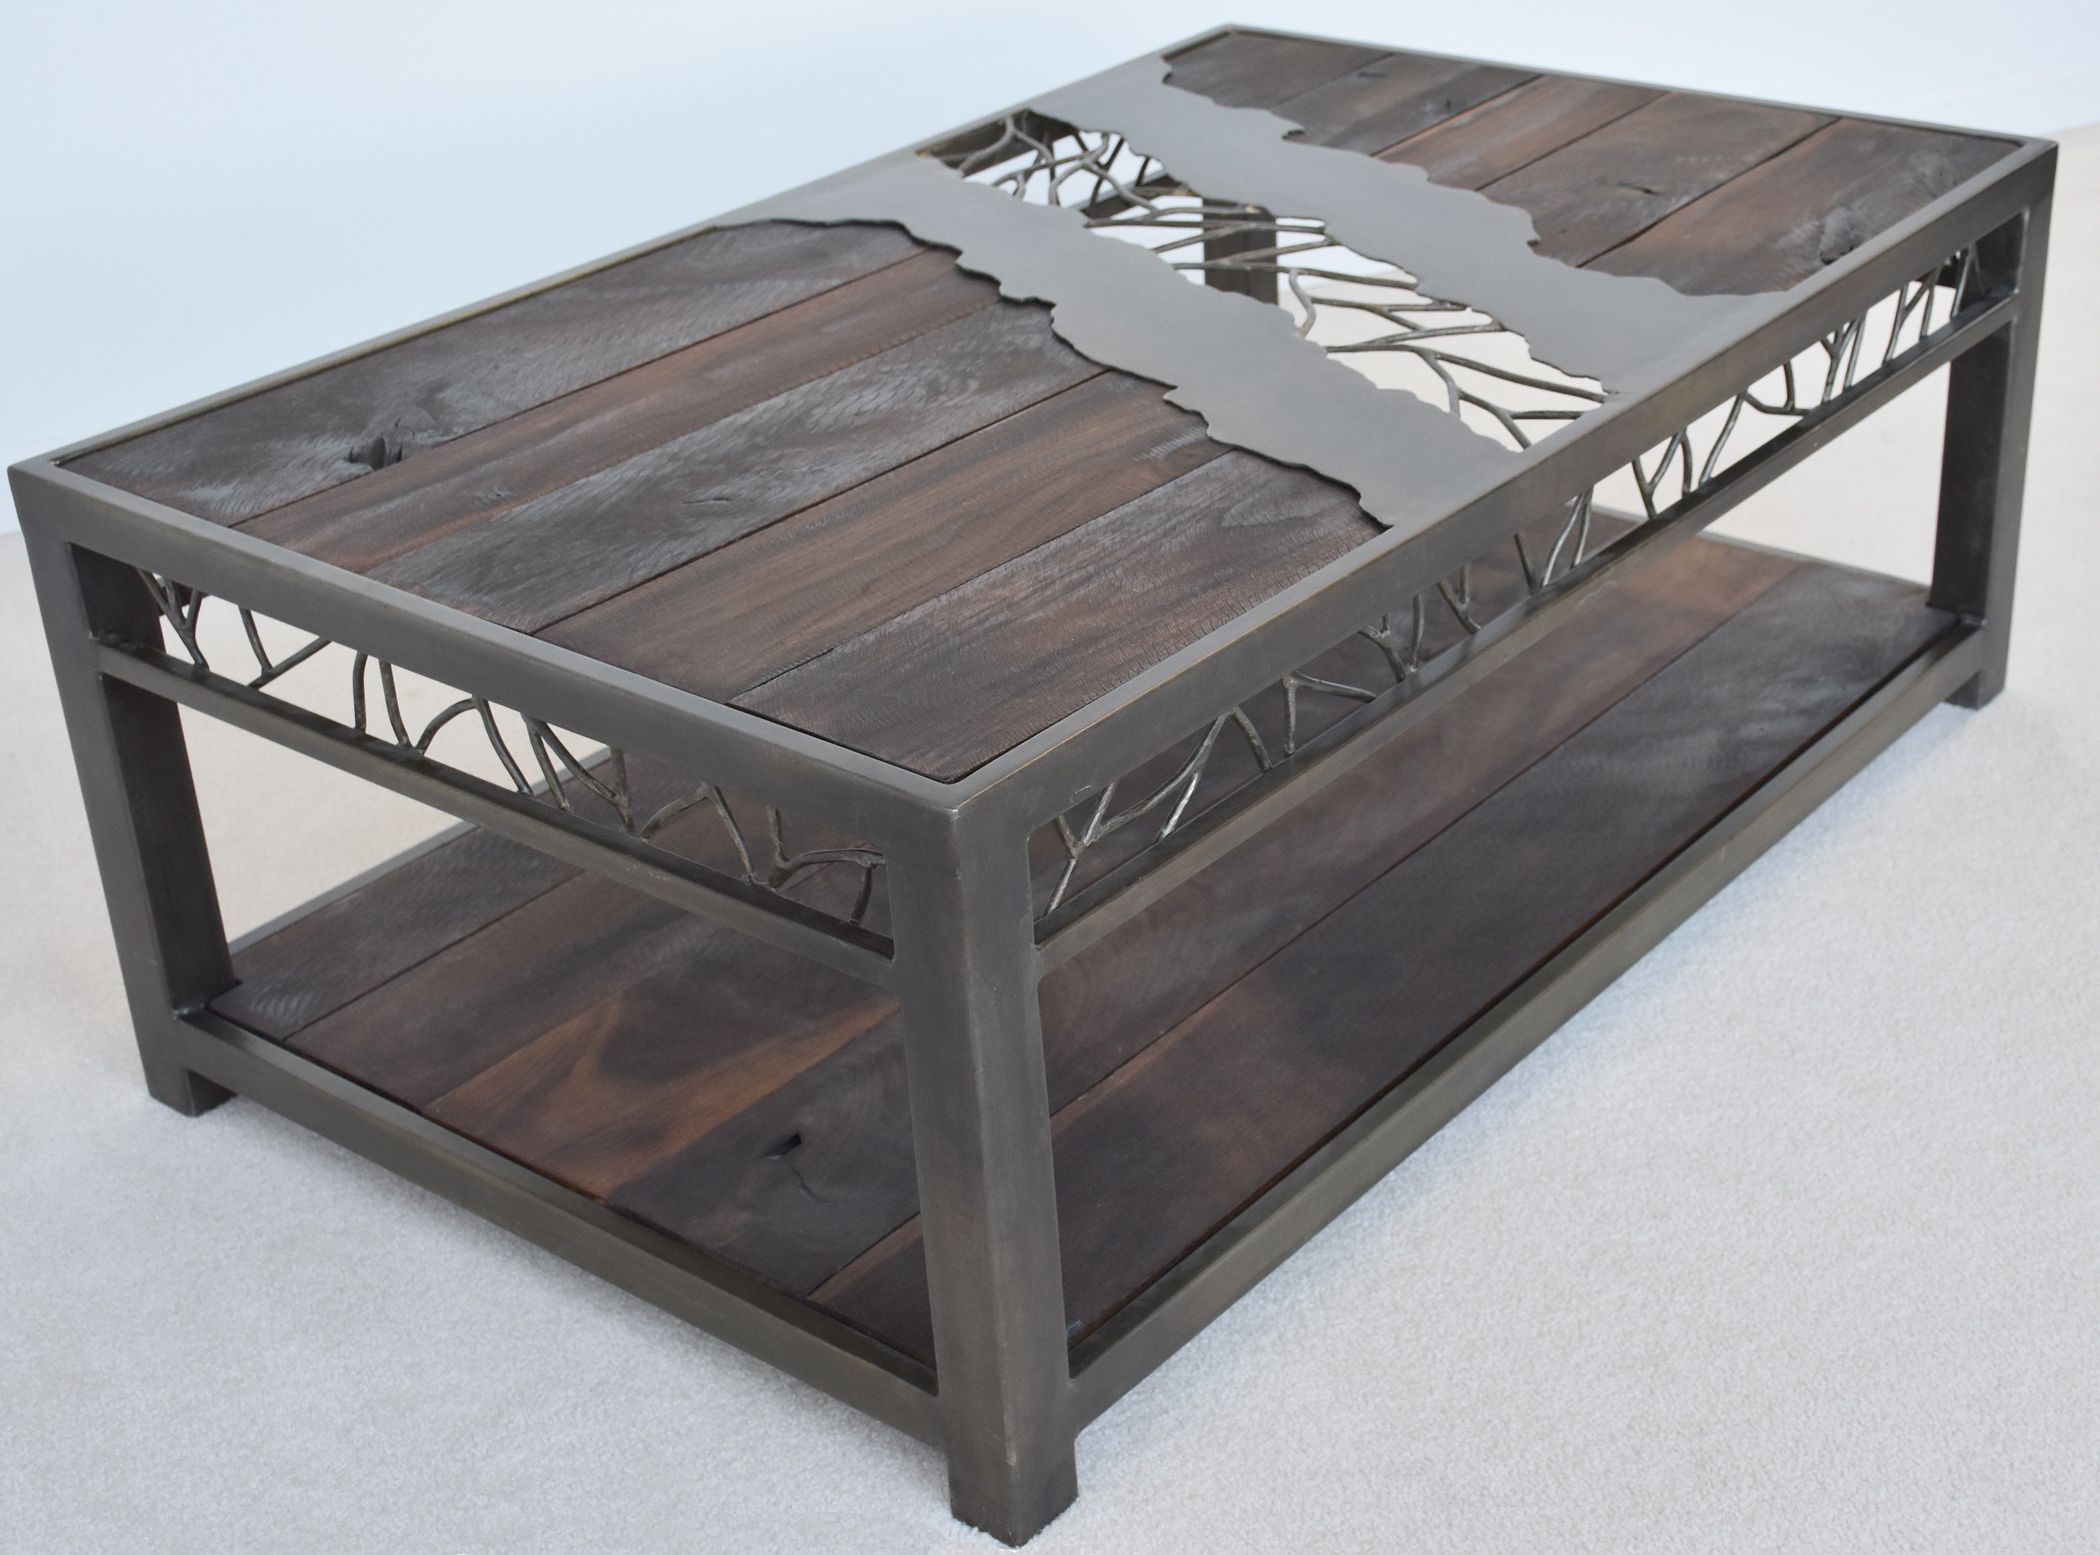 Nollette Metal Works :: Rustic Walnut And Oxidized Metal With 2019 Oxidized Coffee Tables (View 8 of 20)